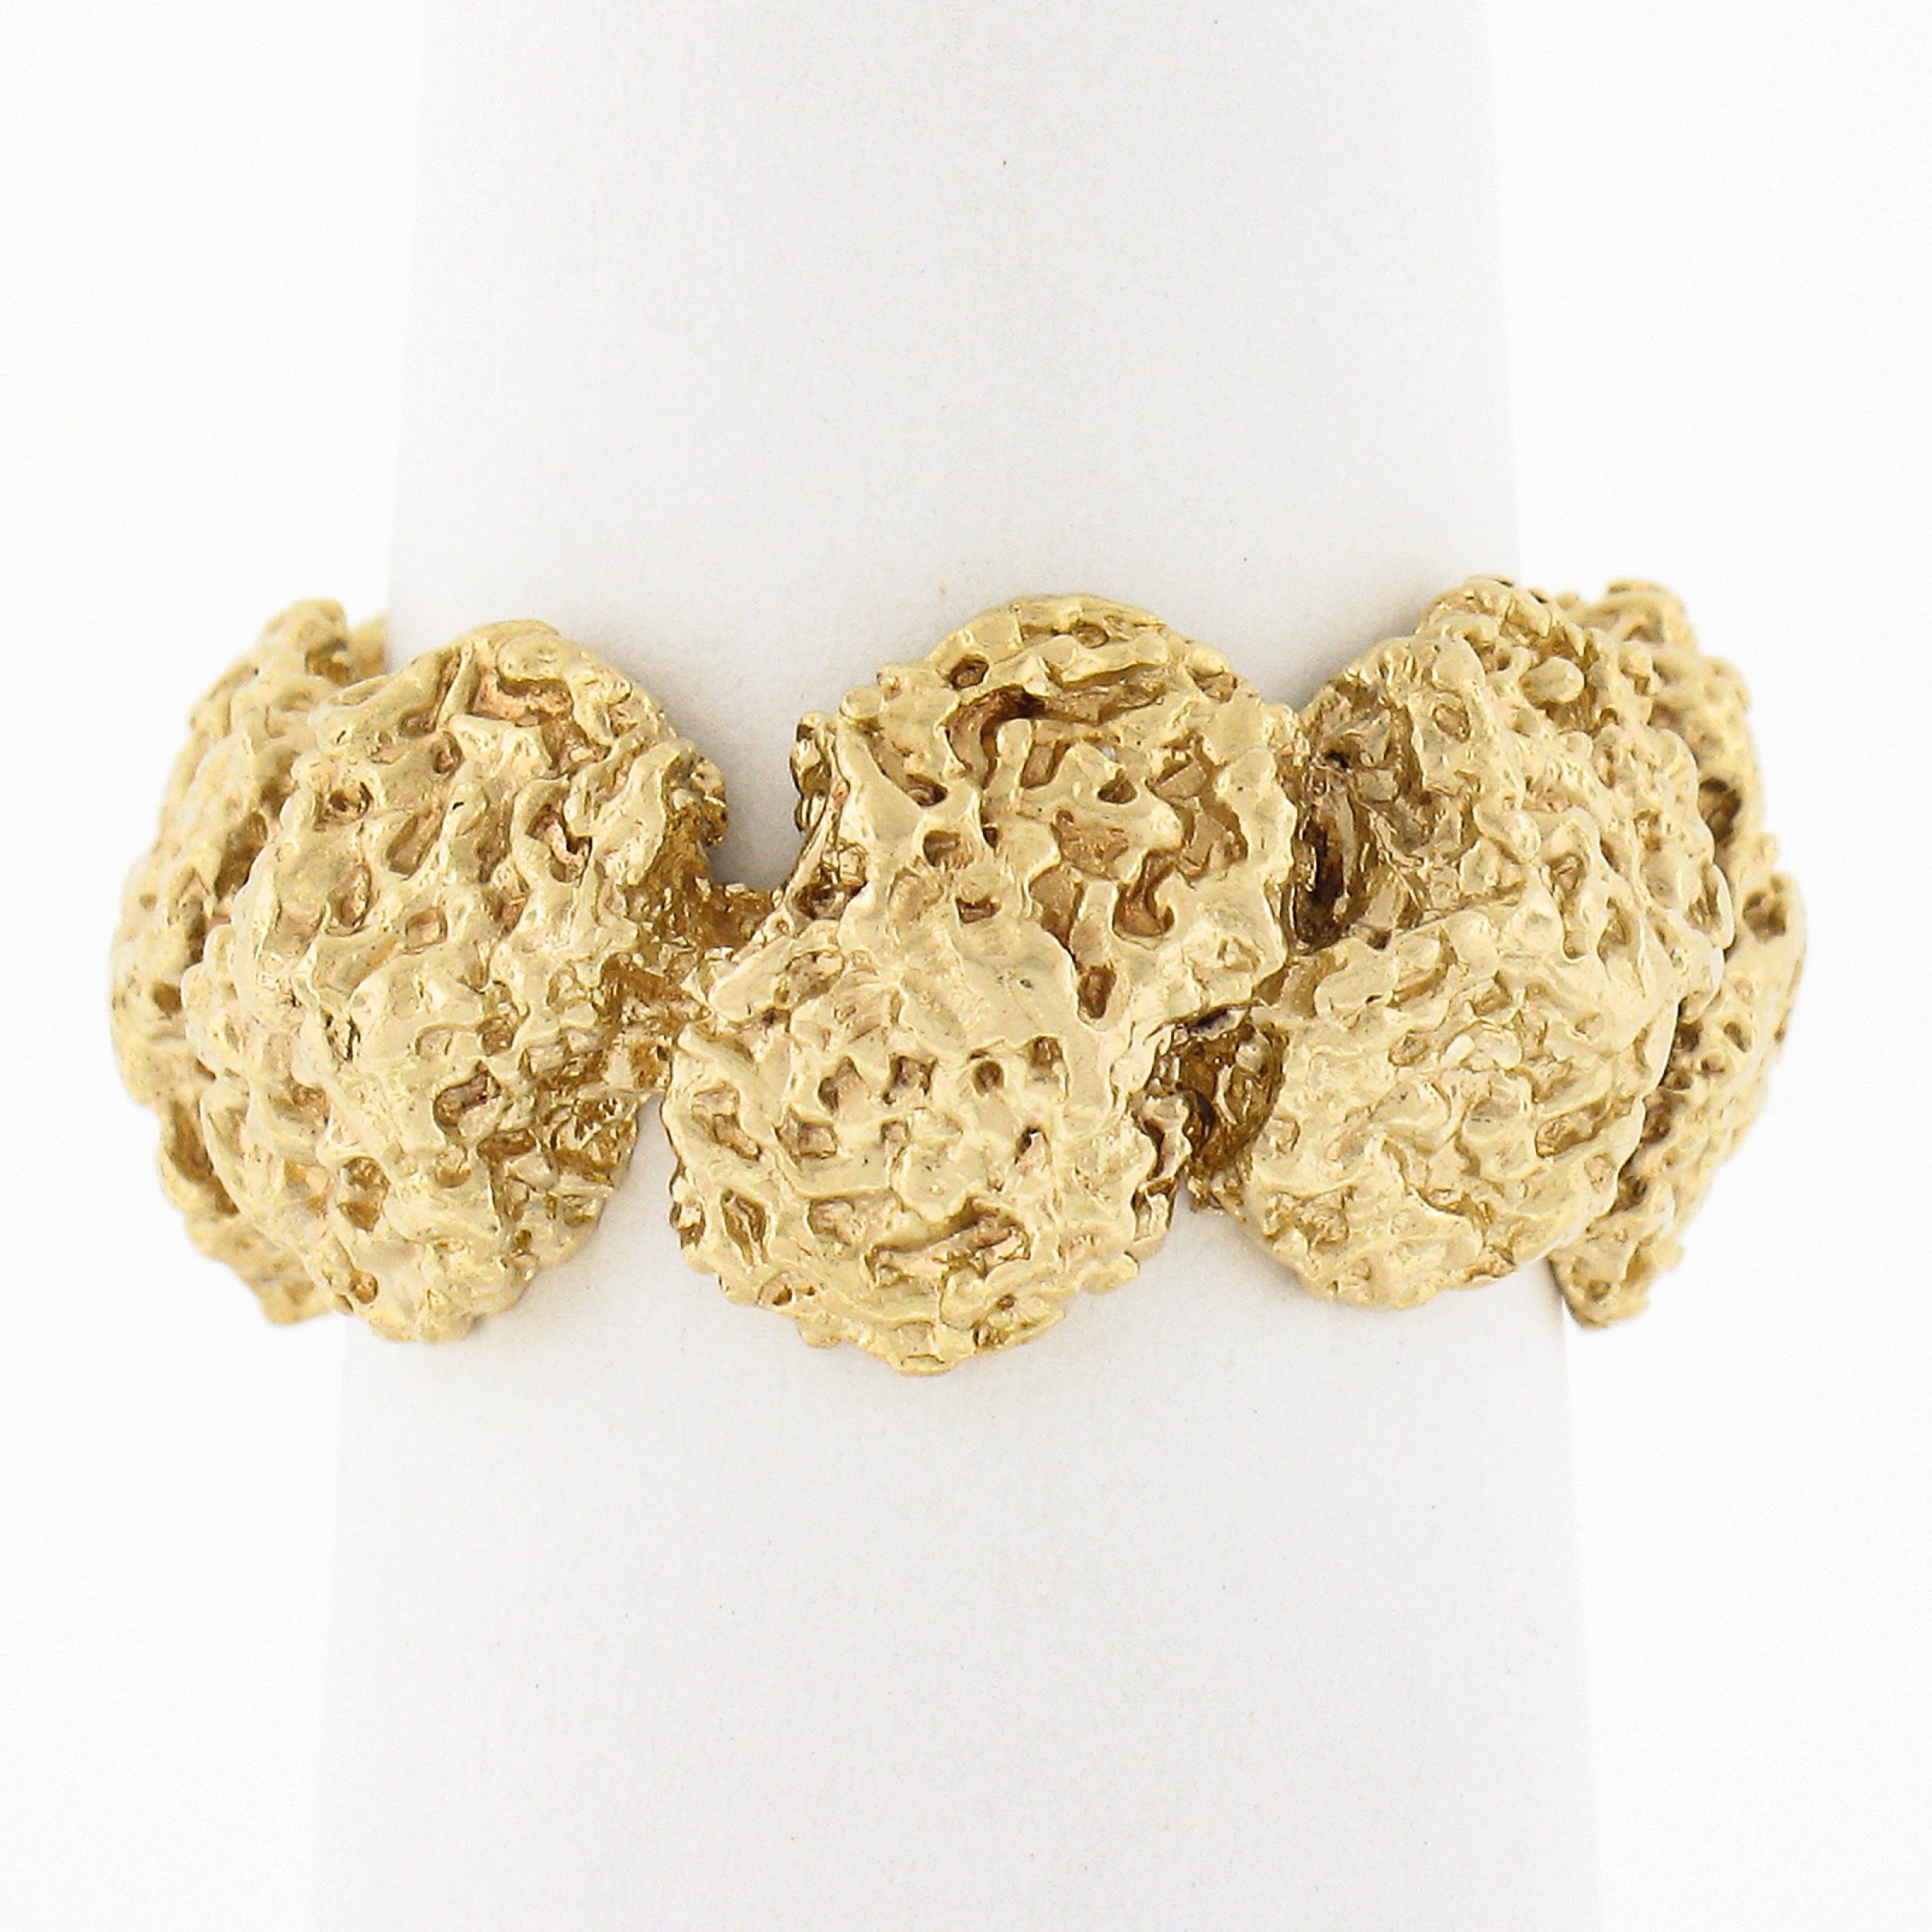 This beautiful and well made vintage ring was crafted from solid 18k yellow gold and features a lovely textured nugget design that runs entirely around the band, creating a bold, very unique, and attractive look on the finger. The wide band remains